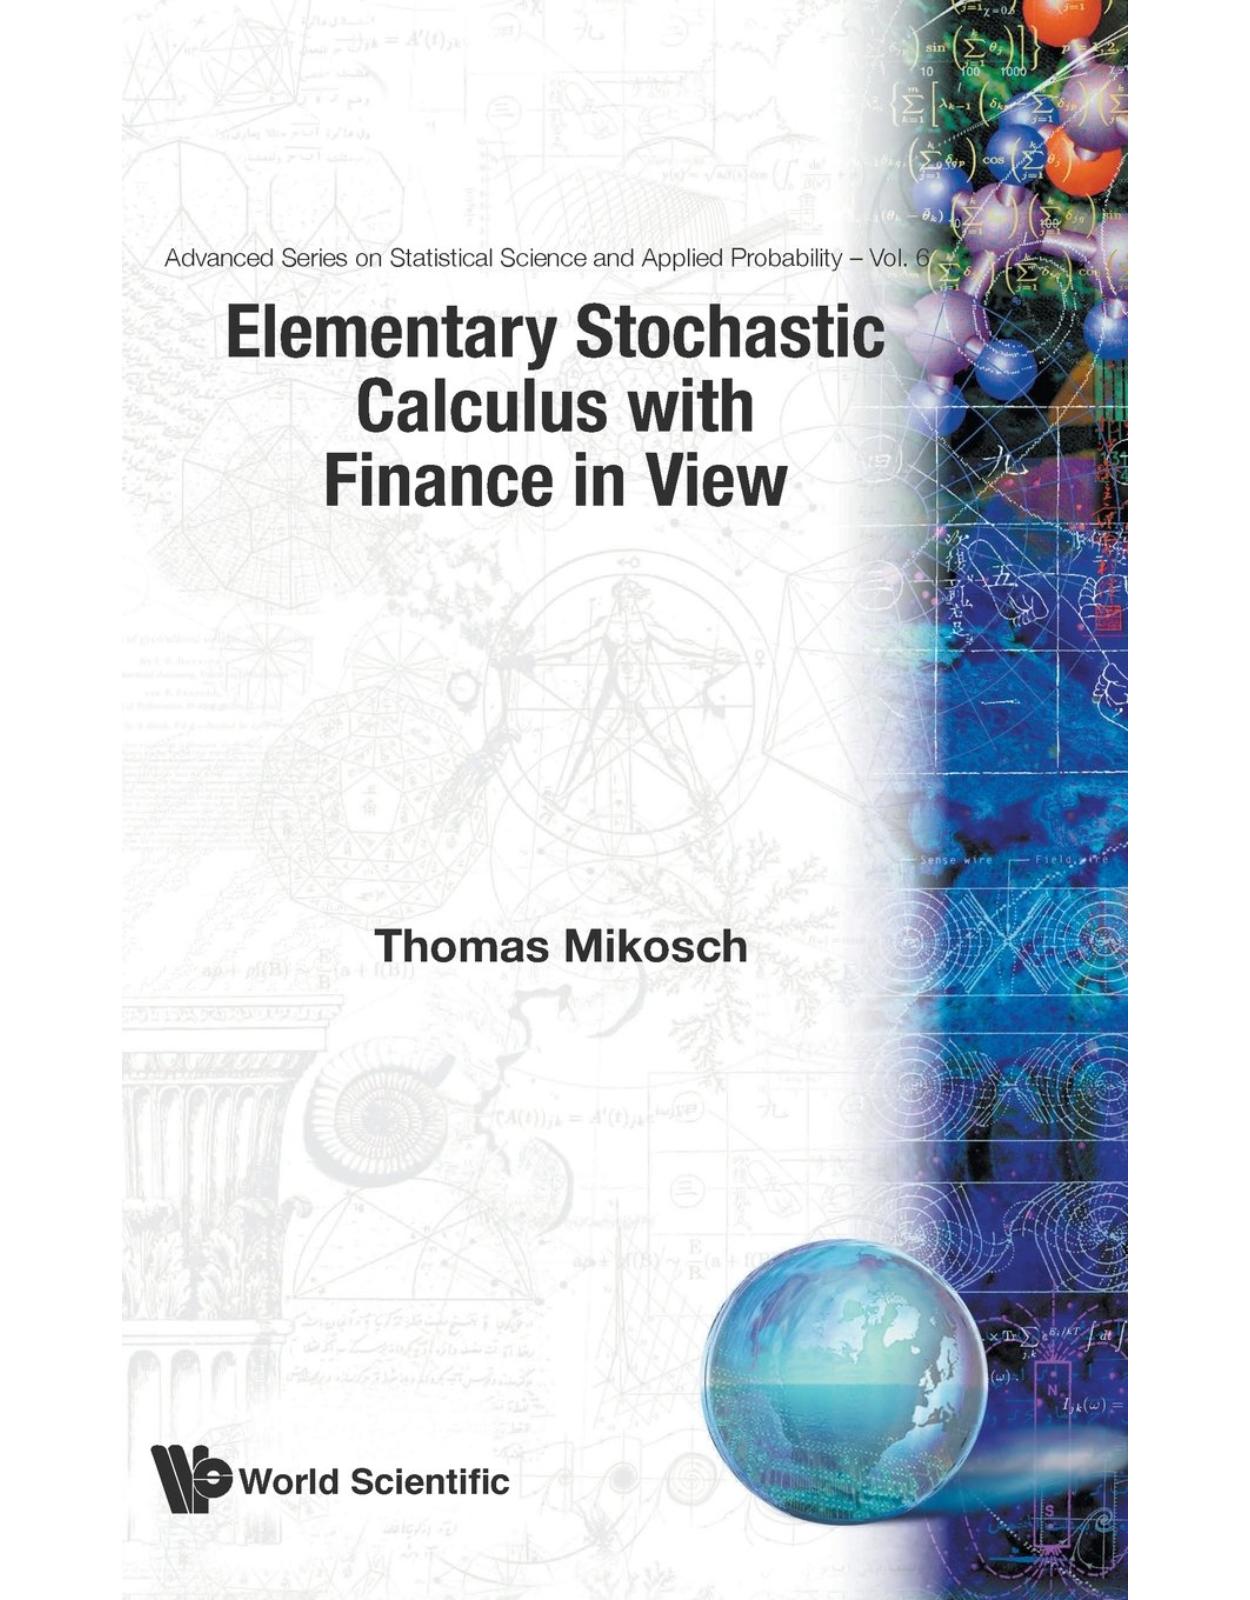 Elementary Stochastic Calculus With Finance in View (Advanced Series on Statistical Science & Applied Probability, Vol 6) (Advanced Series on Statistical Science and Applied Probability)